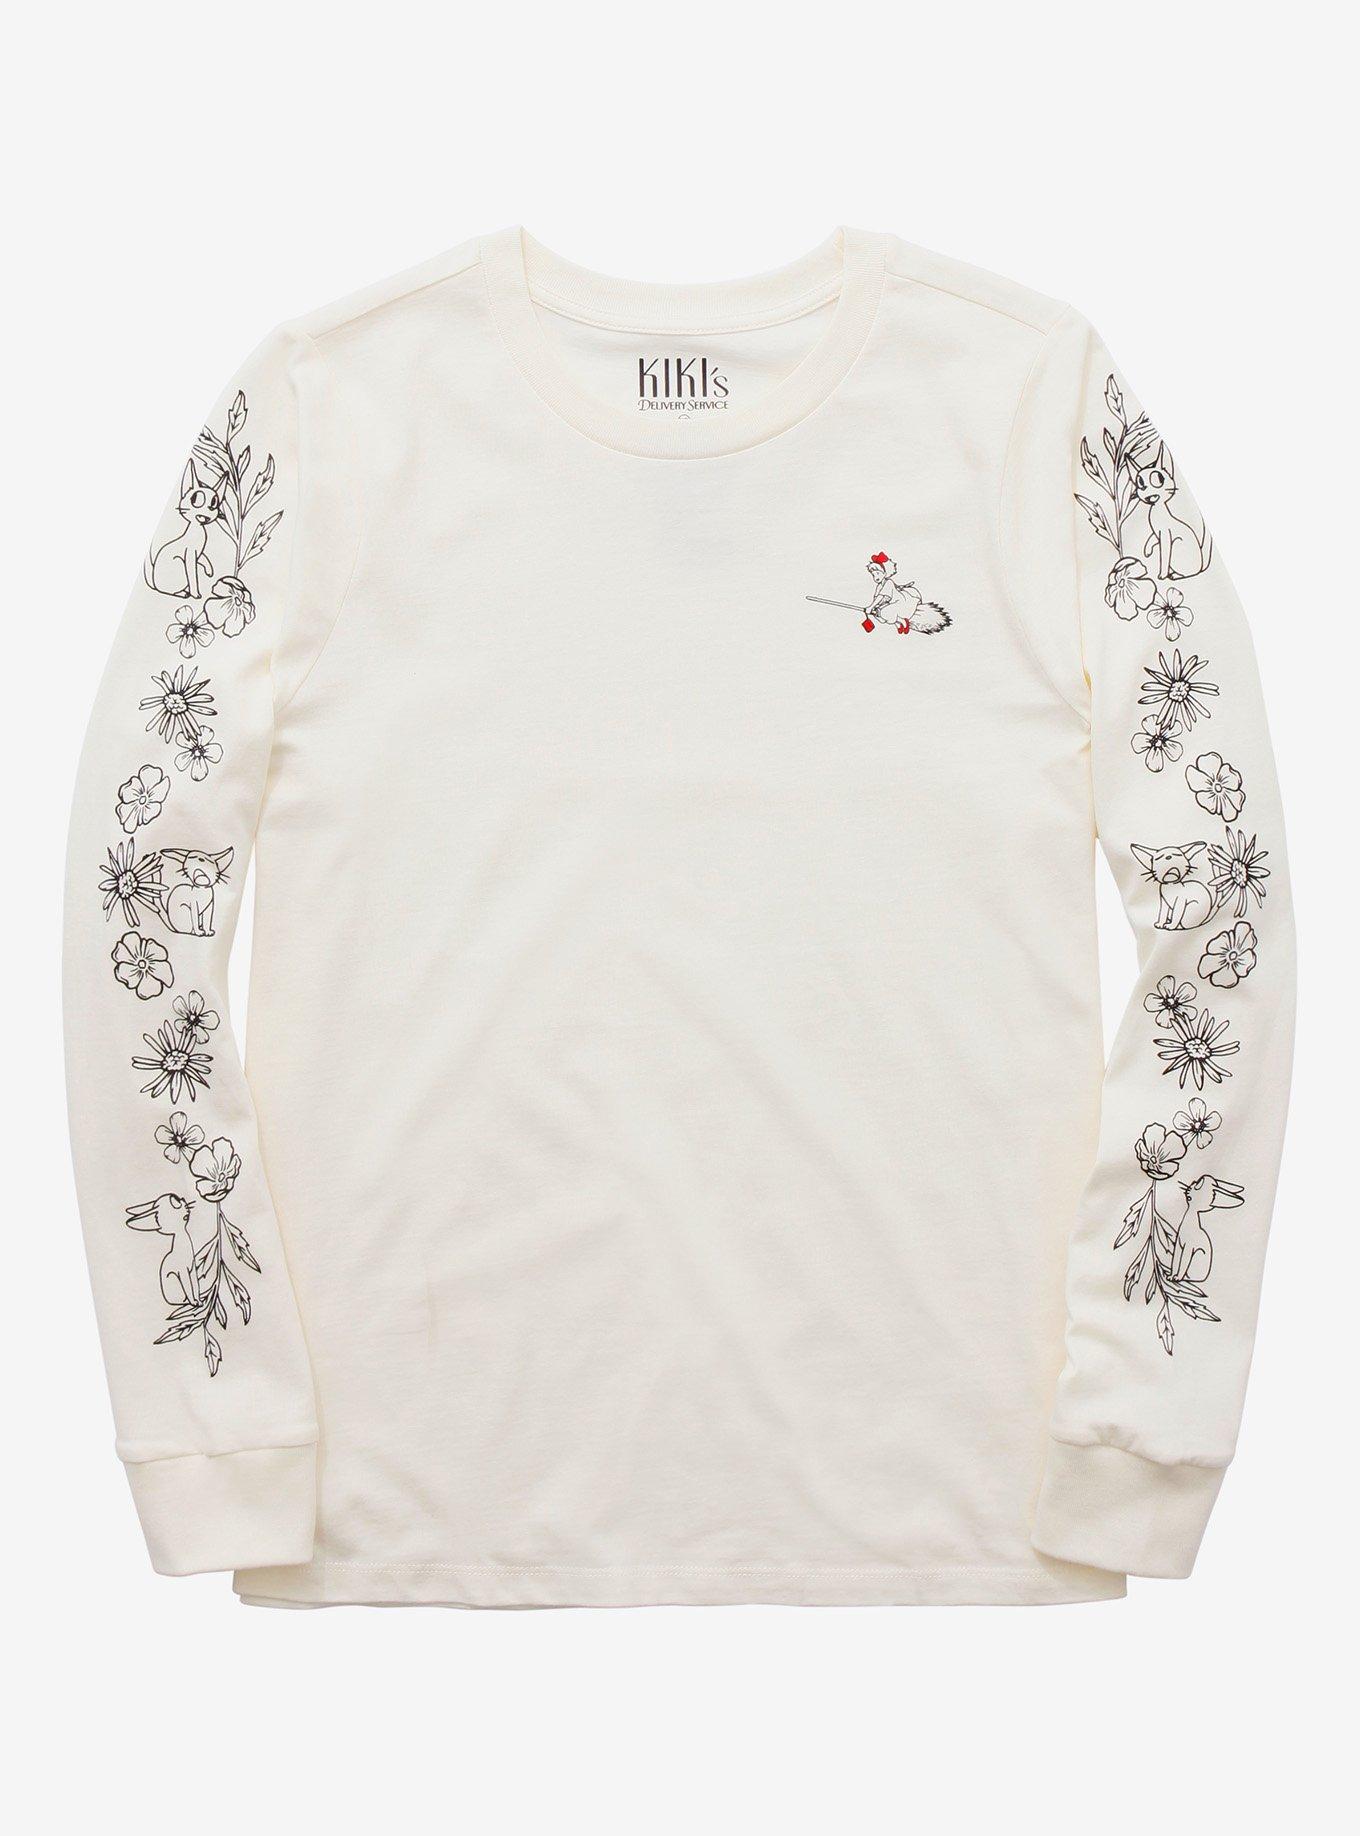 Studio Ghibli Kiki's Delivery Service Floral Long Sleeve T-Shirt - BoxLunch Exclusive, WHITE, hi-res